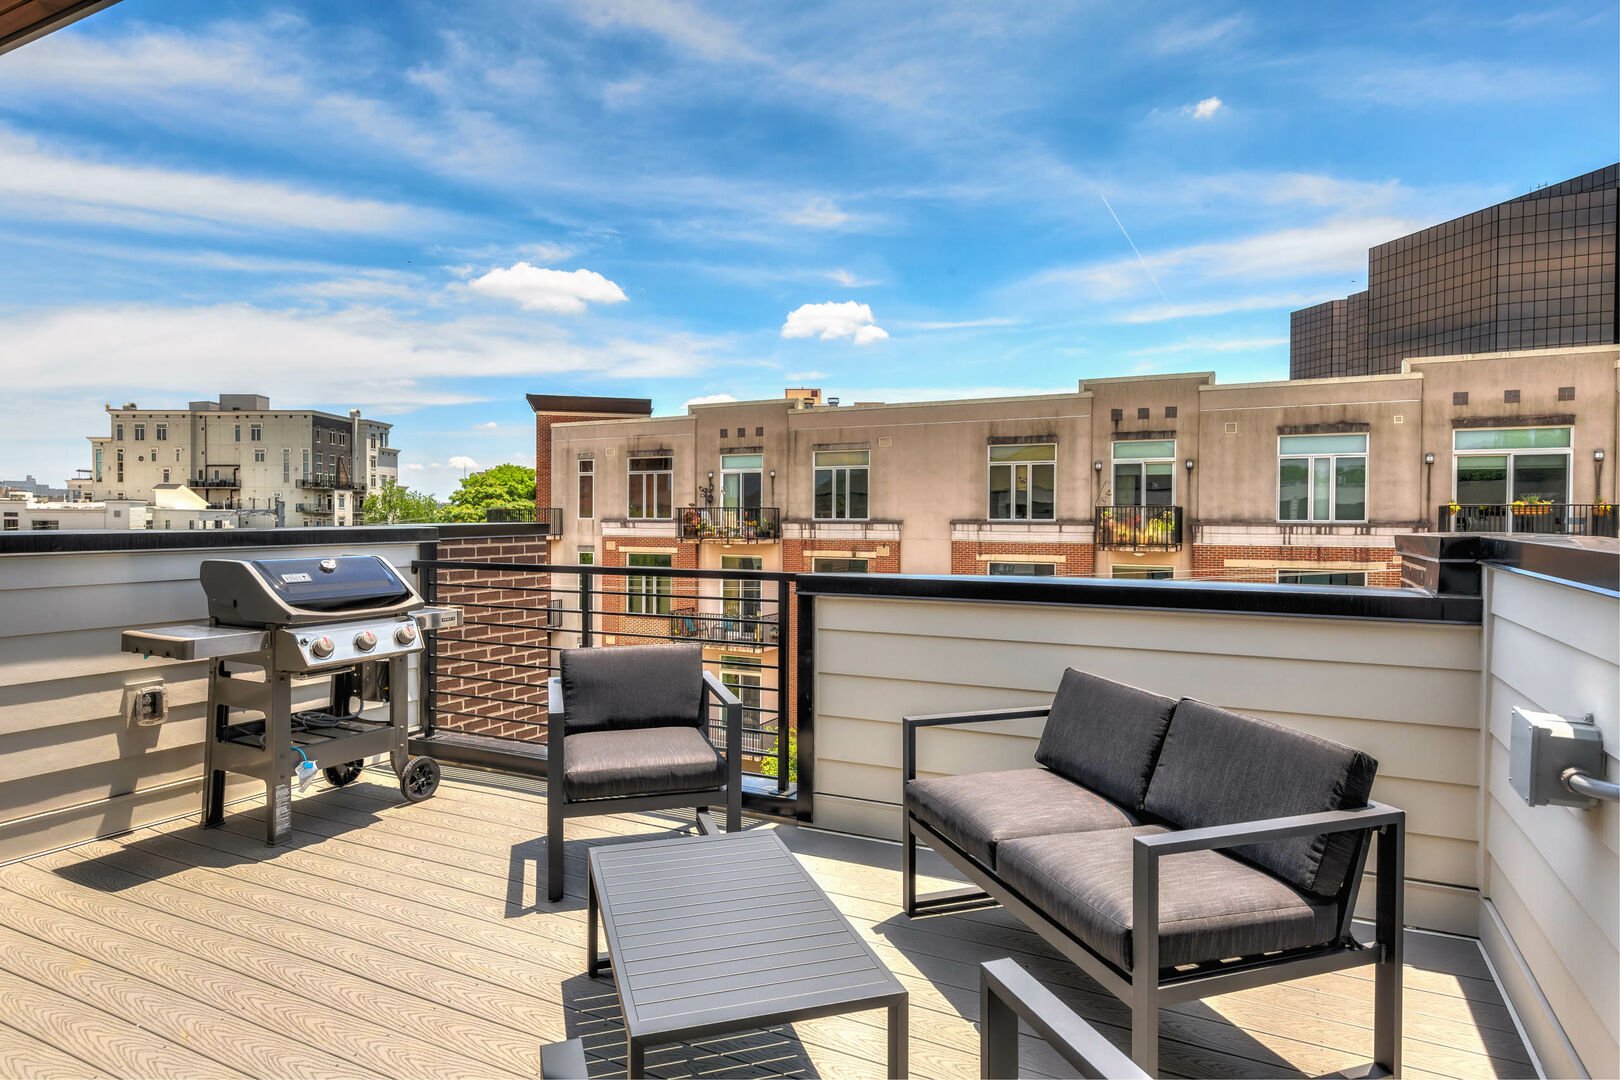 (1st Unit): Private rooftop patio with BBQ grill, lounge area, and incredible views of downtown.